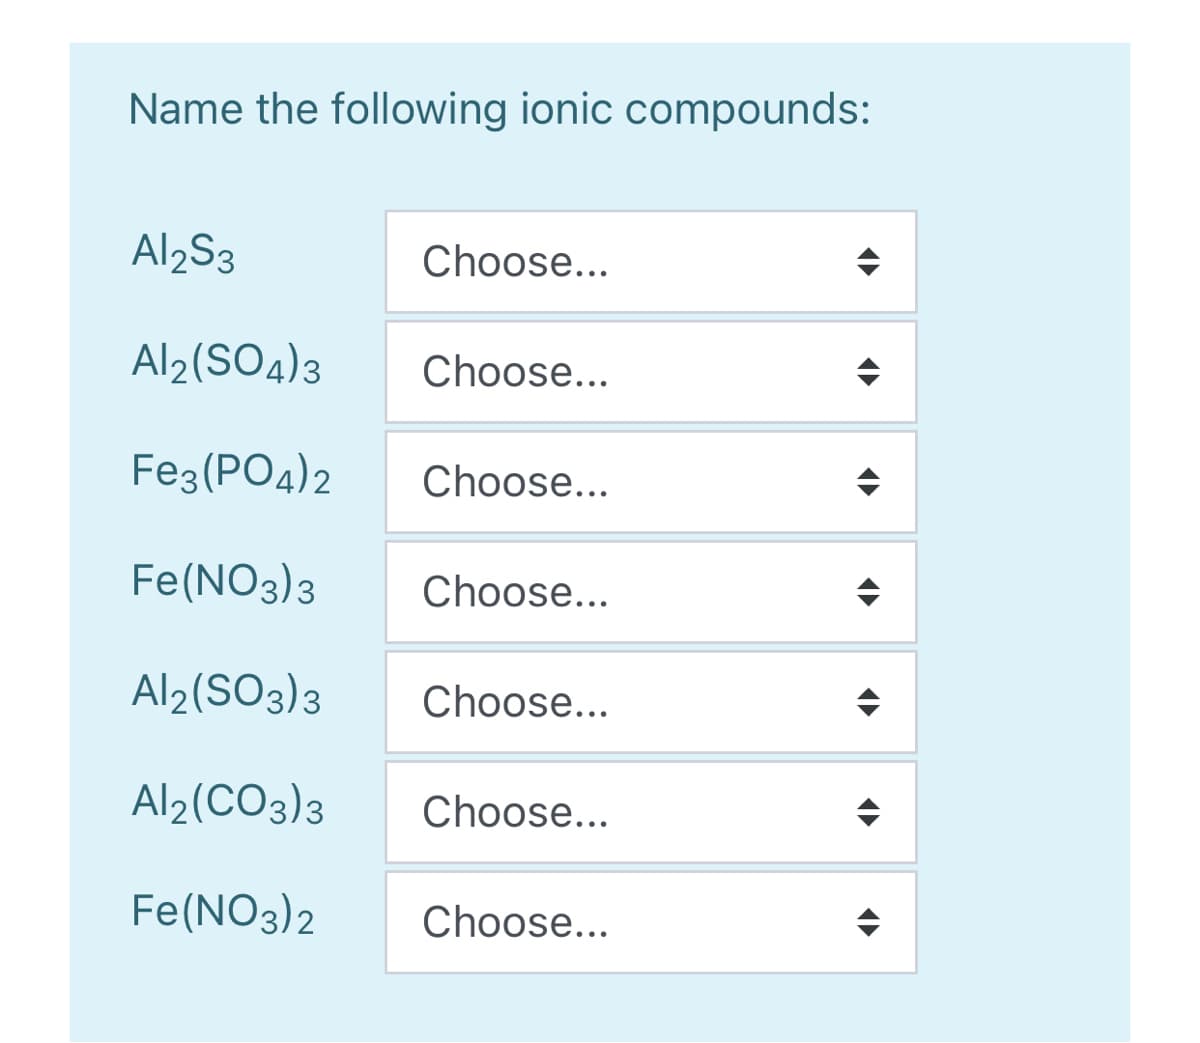 Name the following ionic compounds:
Al2S3
Choose...
Al2(SO4)3
Choose...
Fe3 (PO4)2
Choose...
Fe(NO3)3
Choose...
Al2(SO3)3
Choose...
Al2(CO3)3
Choose...
Fe(NO3)2
Choose...
